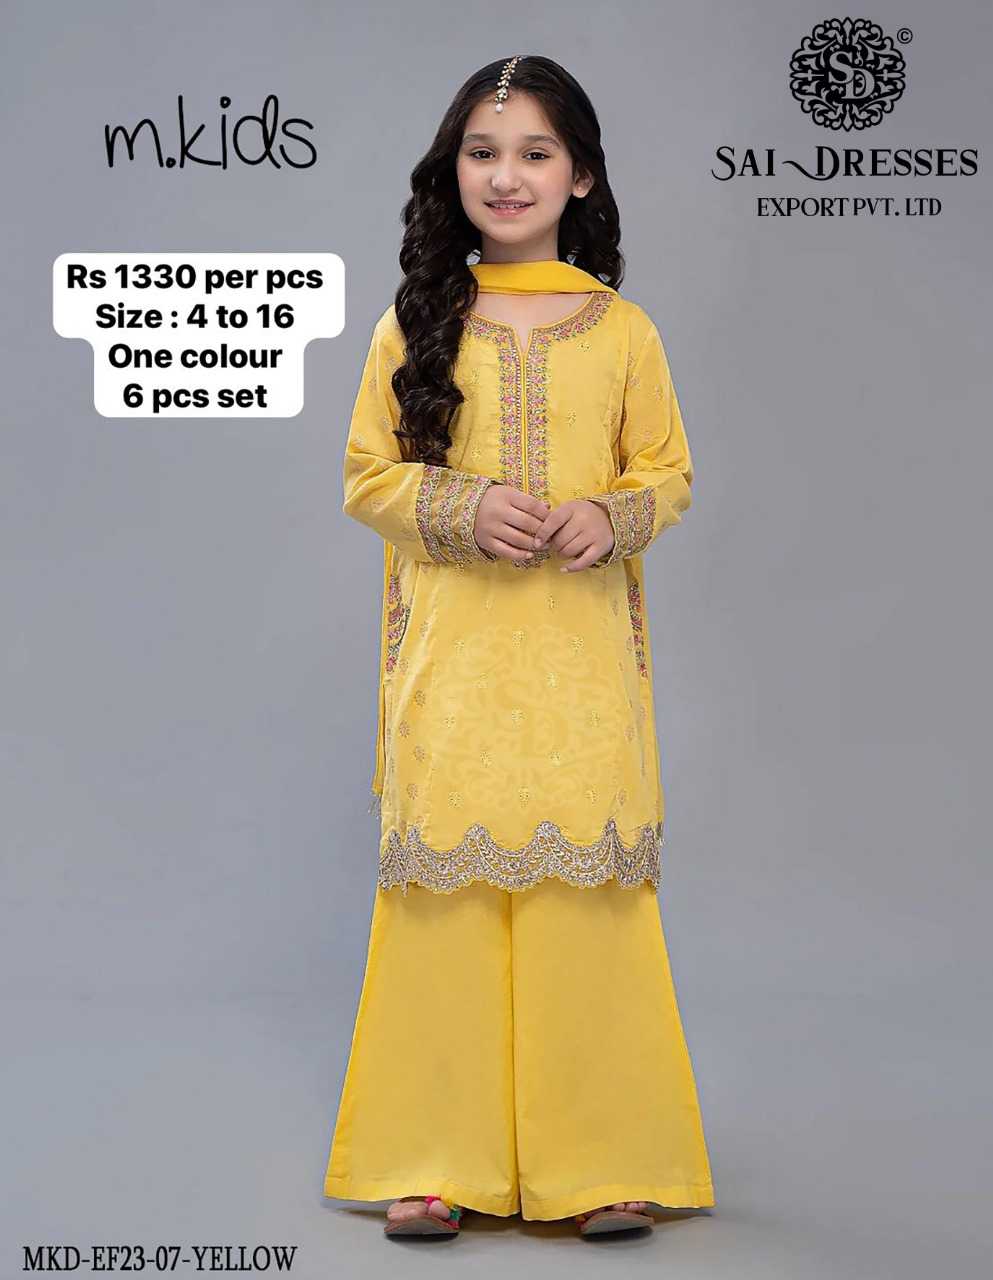 SAI DRESSES PRESENT D.NO 41 READY TO PARTY WEAR GHARARA STYLE DESIGNER PAKISTANI KIDS COMBO SUITS IN WHOLESALE RATE IN SURAT